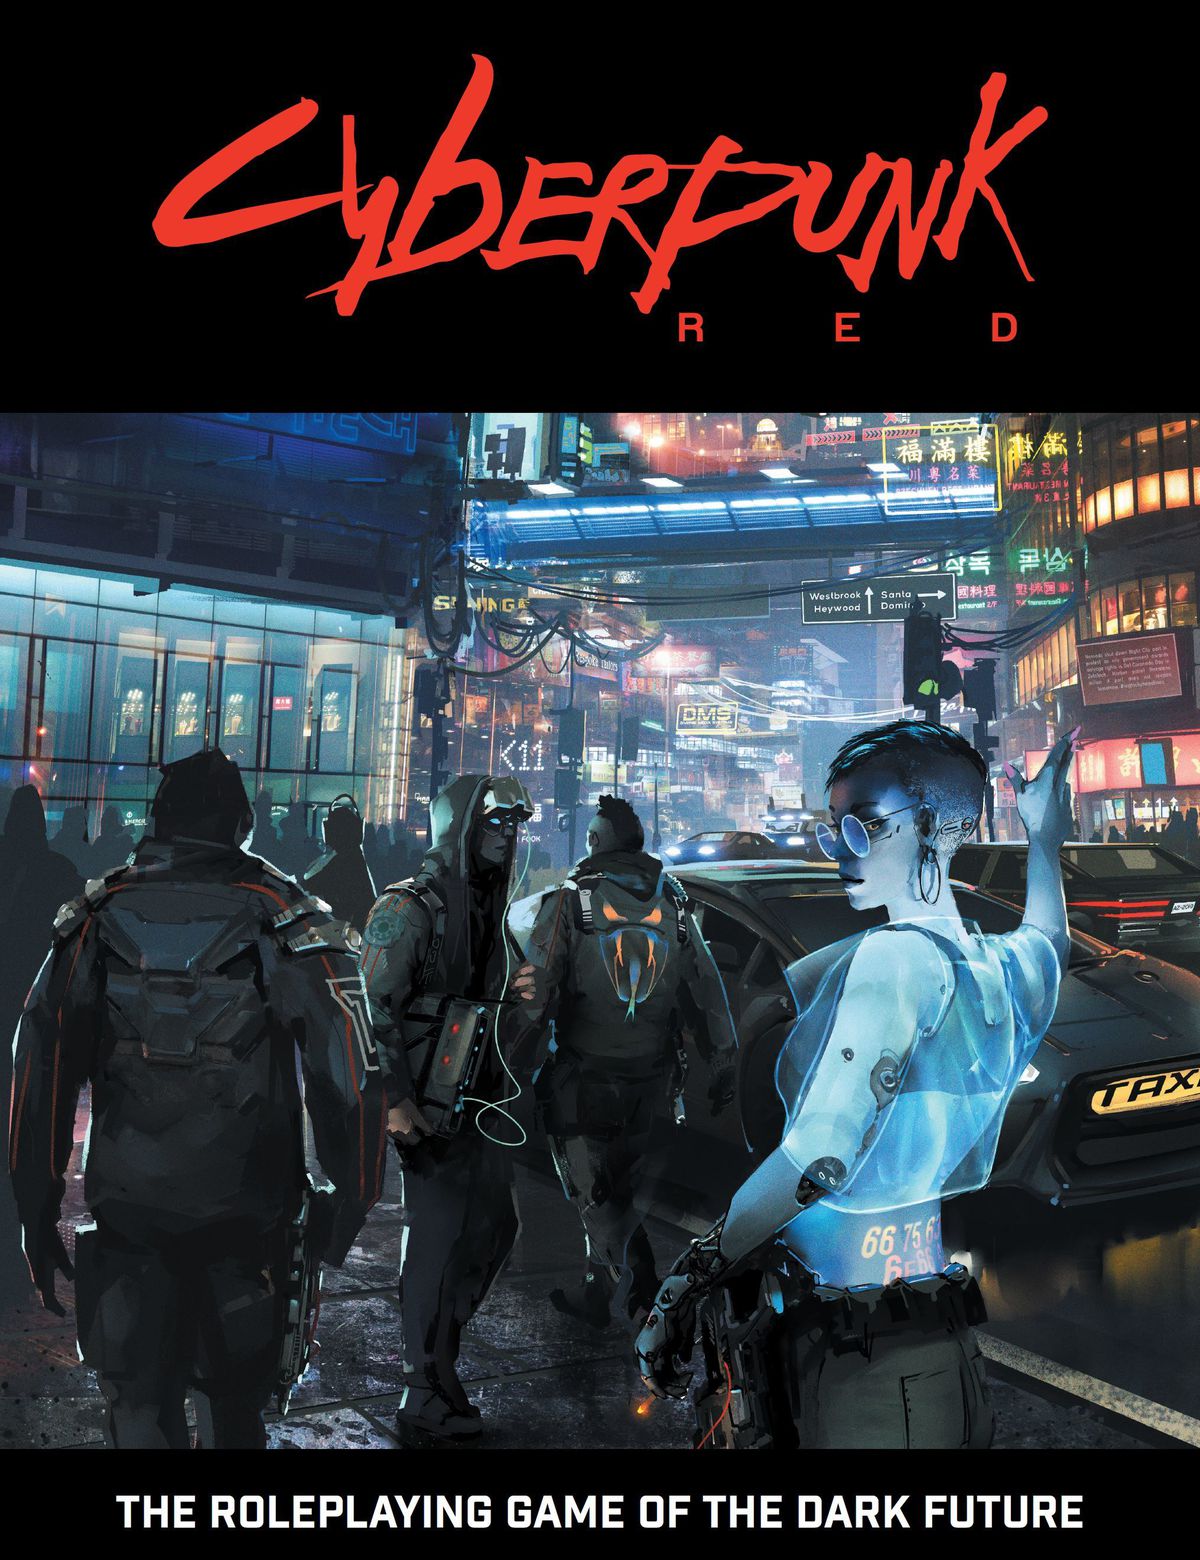 Cover art for Cyberpunk Red shows a woman haling a taxi in a futuristic city scene.